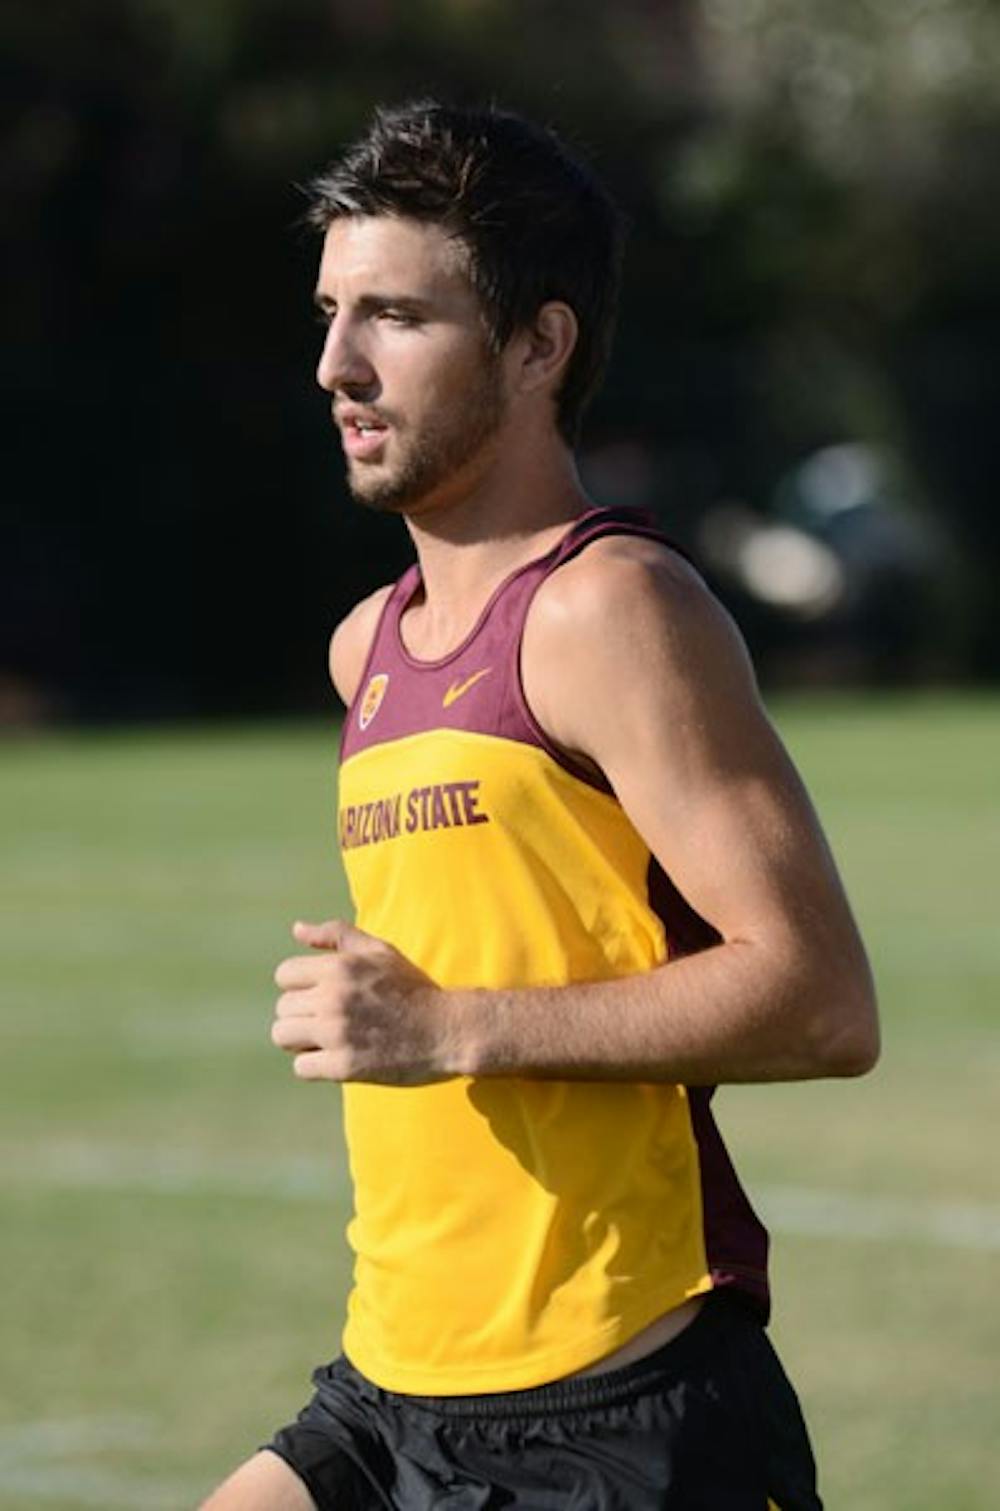 ASU graduate student Zach Zarda trains during practice Oct. 3 before the Grand Canyon Invitational on Oct. 6. (Photo by Aaron Lavinsky)